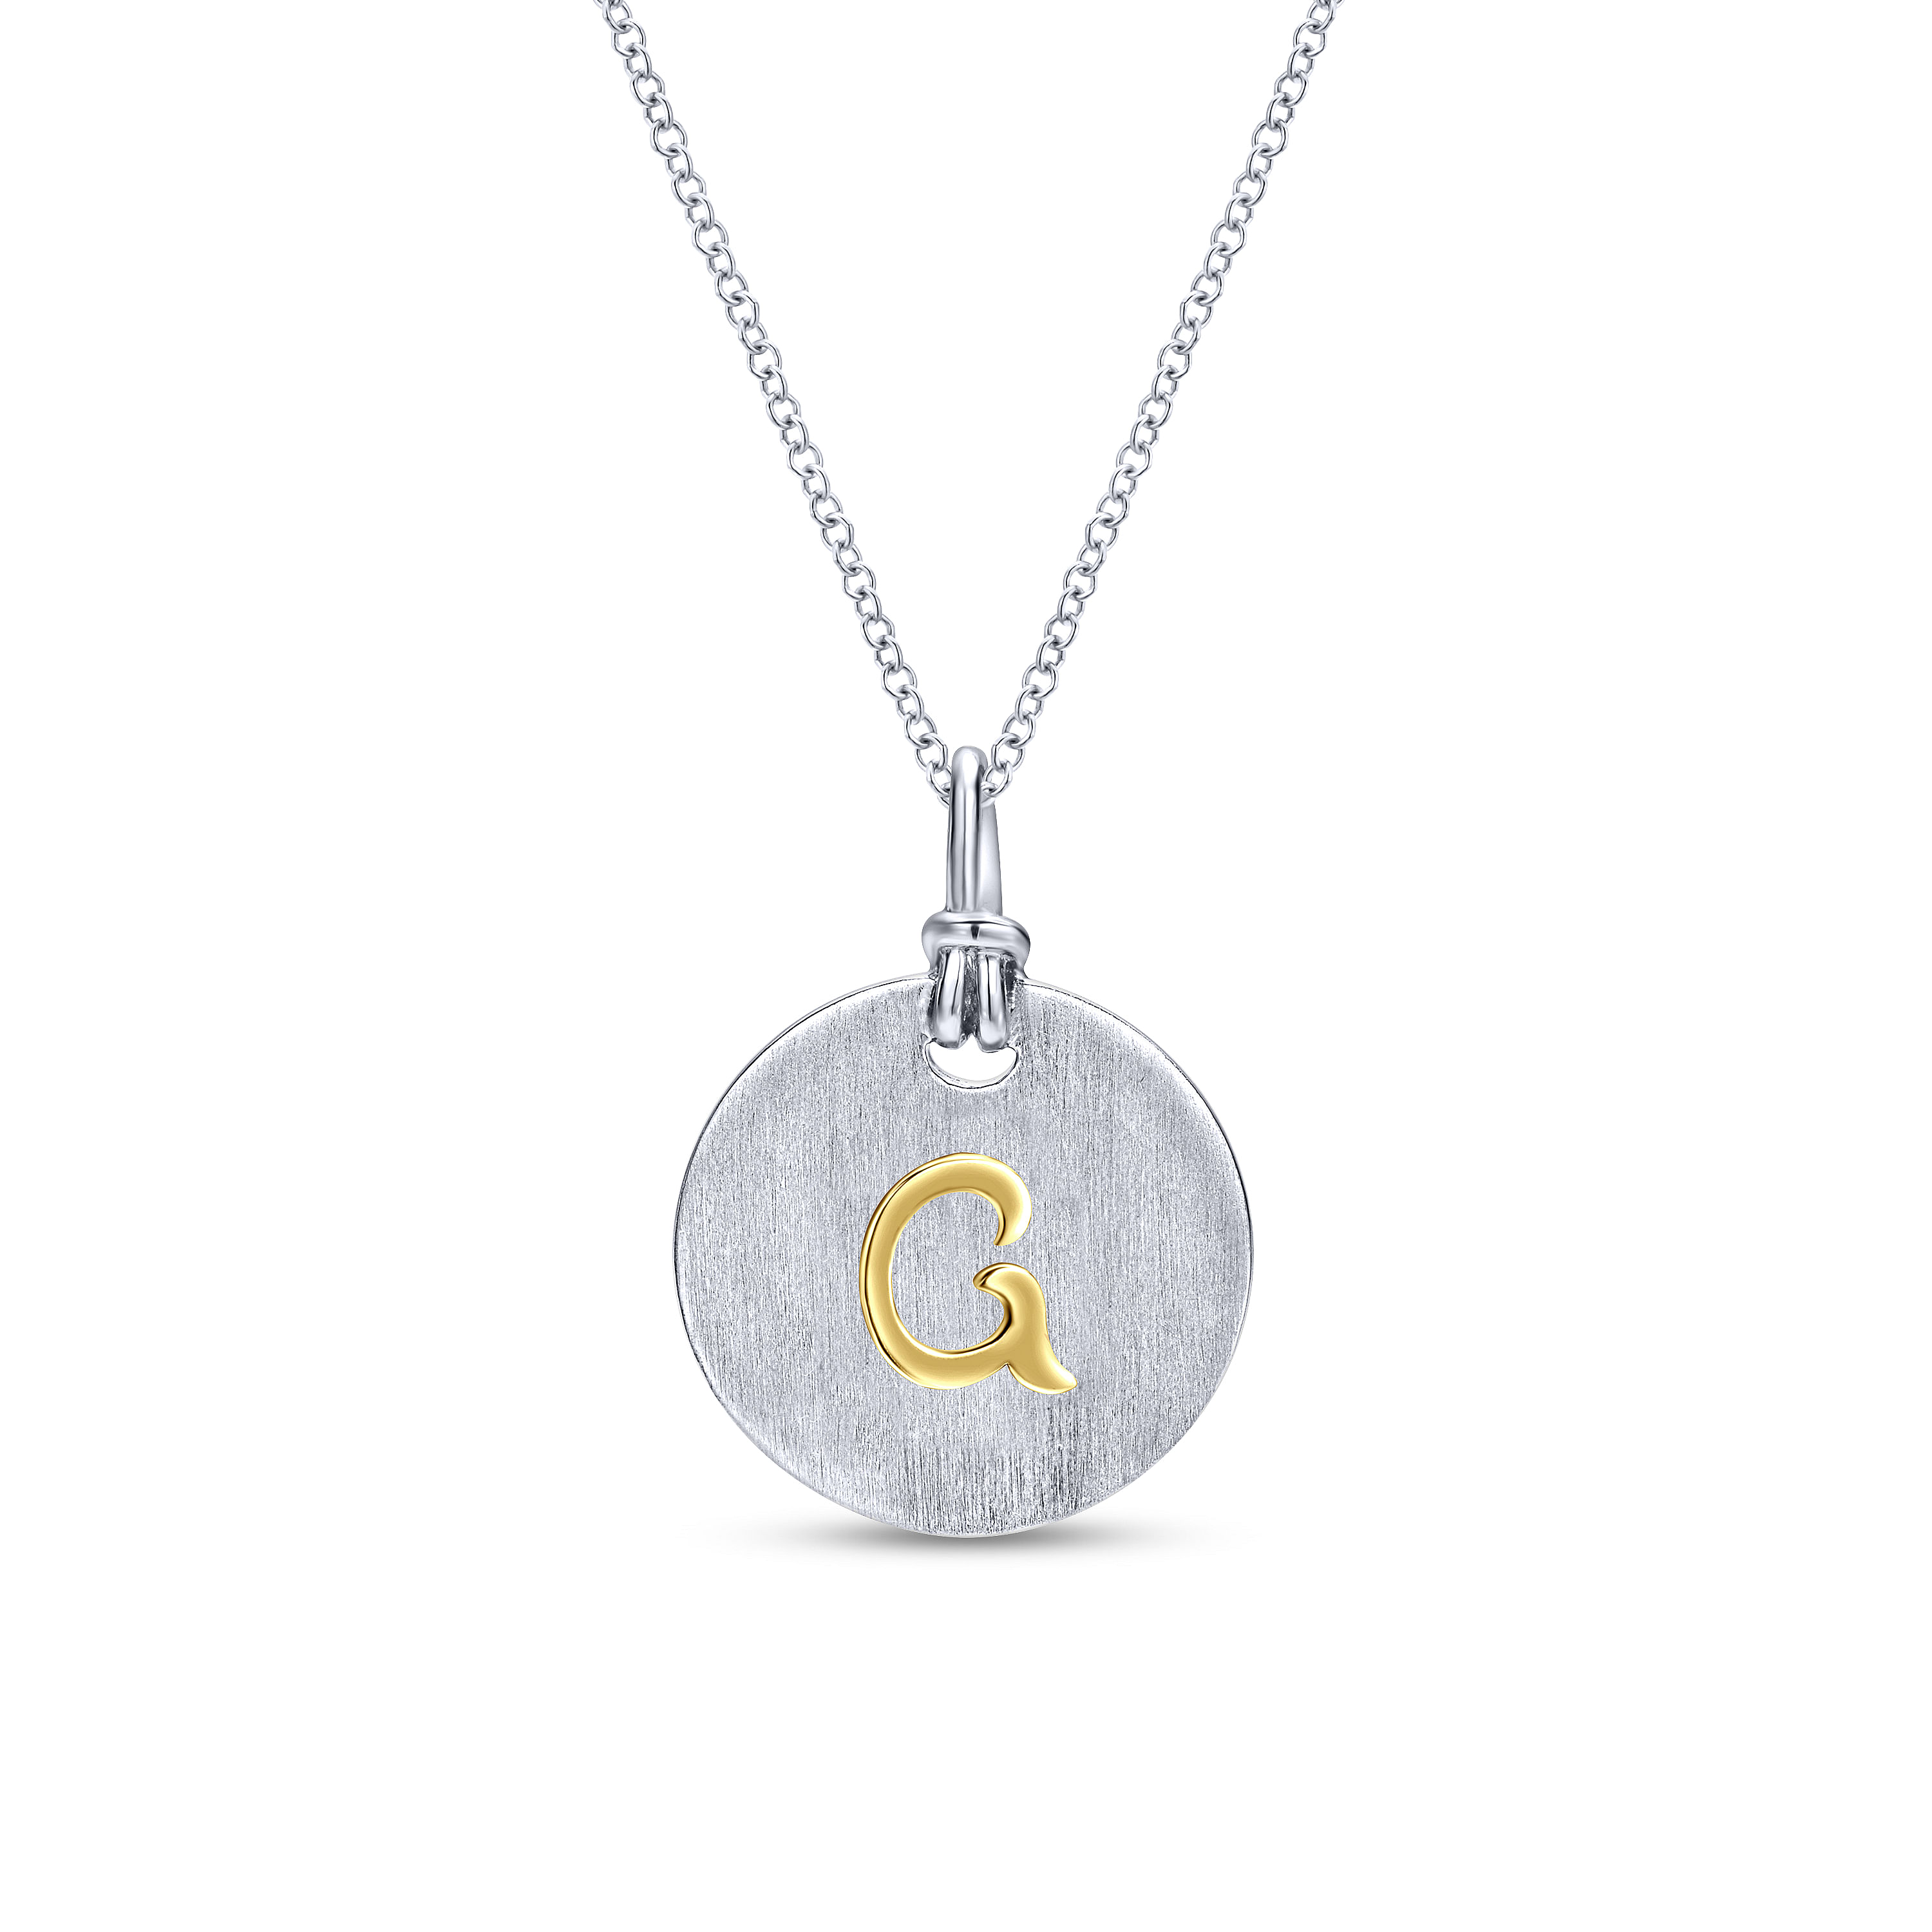 Silver 18K Yellow G Initial Round Disk Necklace